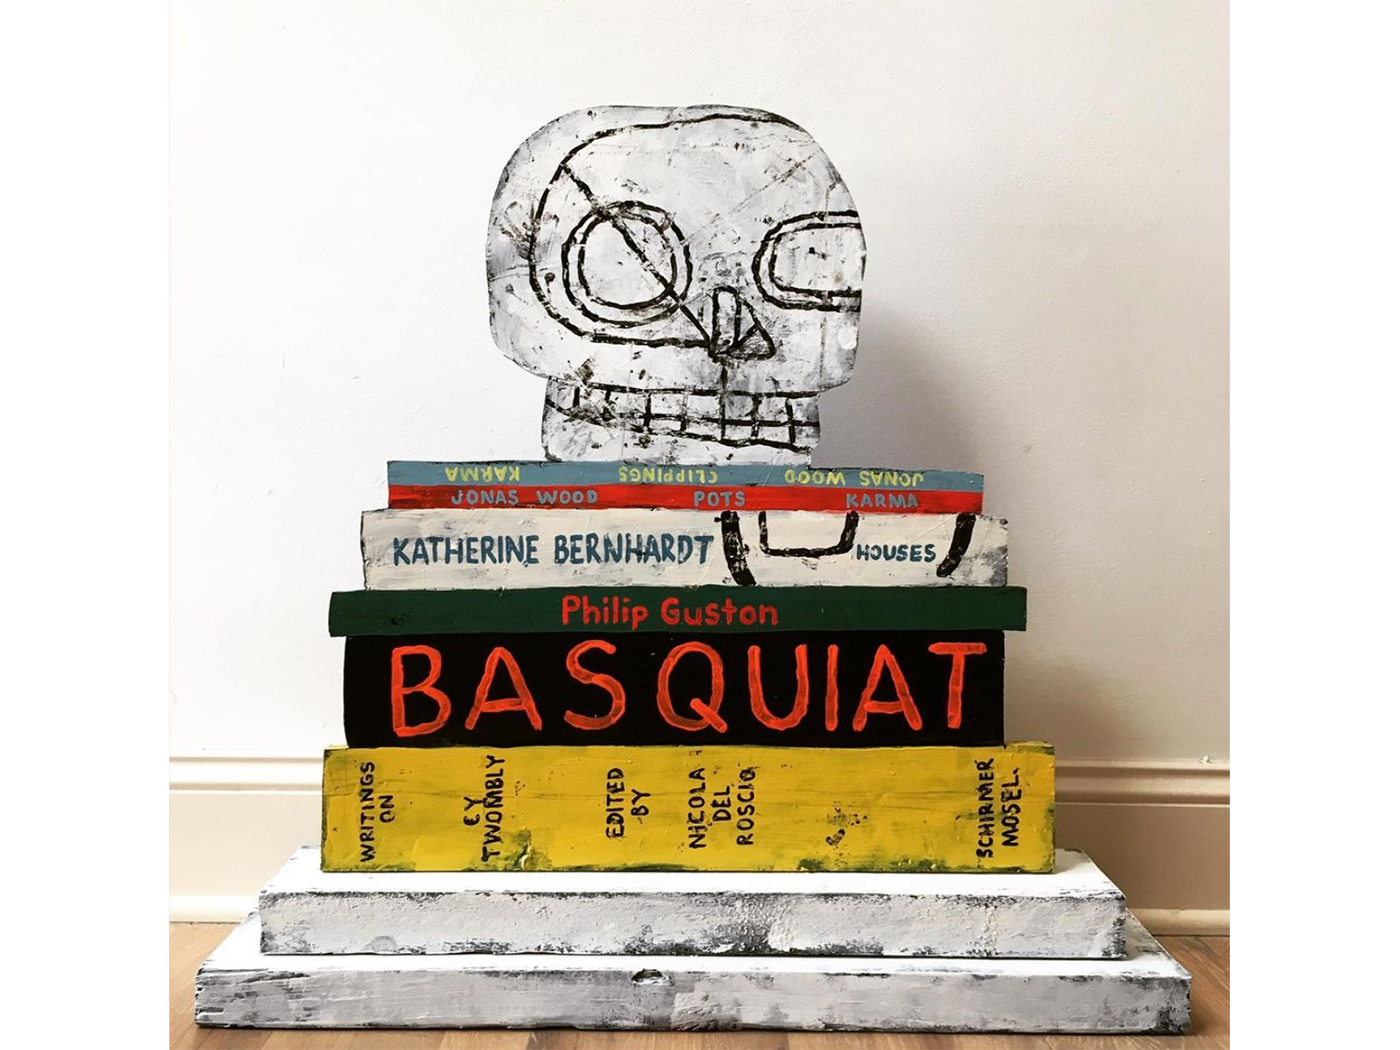 Jonathan Edelhuber’s work seeks to align his style alongside the canonical art figures of the contemporary art world. The recurring image of stacked books are often used by Edelhuber to create plinths for his own works. As seen here in 'Still Life With Skull and Art Books', (2019) referencing Katherine Bernhardt. 
